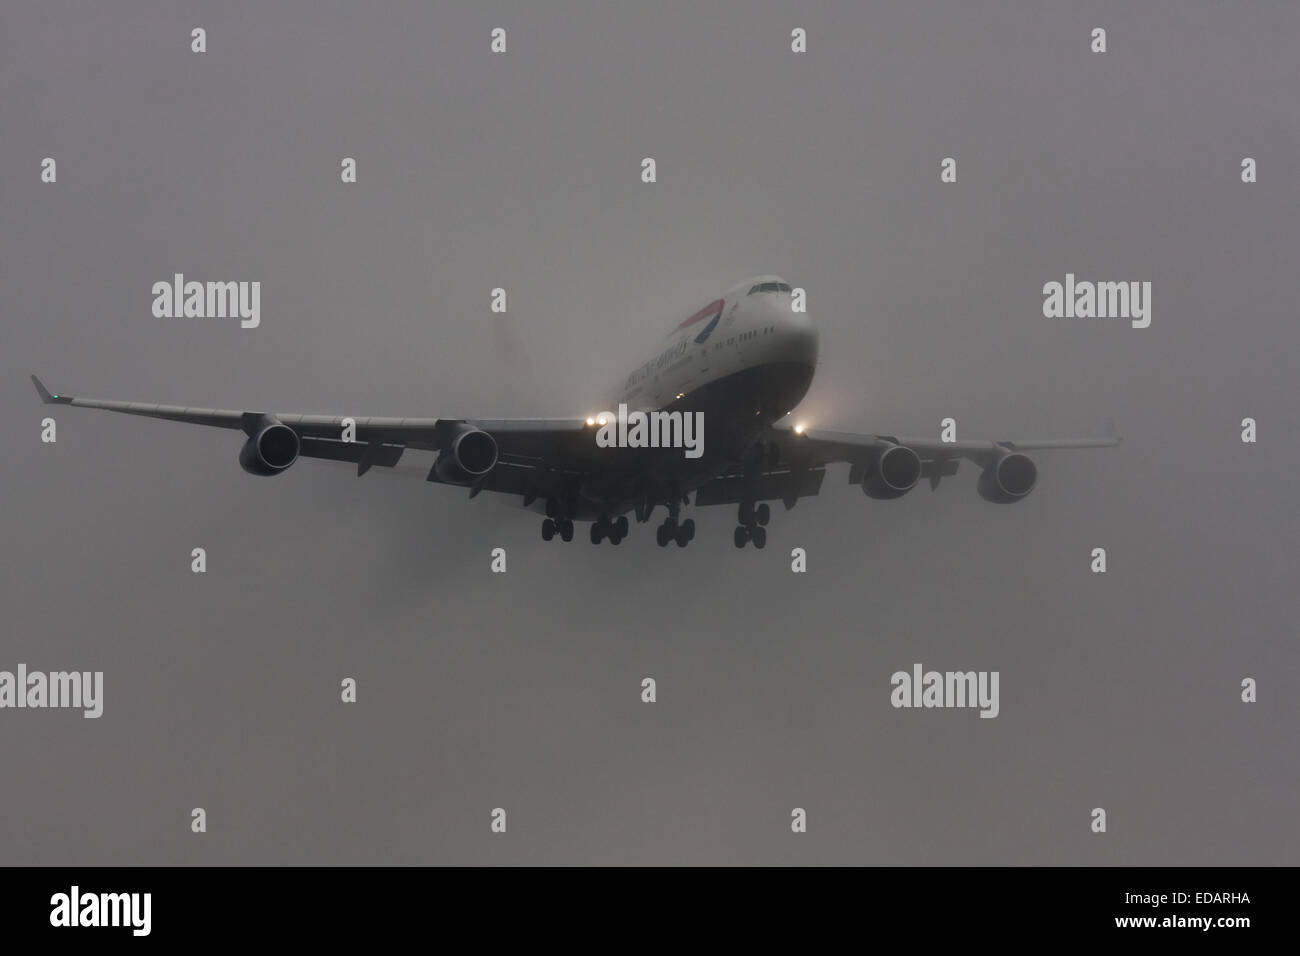 January 3rd 2015, Heathrow Airport, London. Low cloud and rain provide ideal conditions to observe wake vortexes and 'fluffing' as moisture condenses over the wings of landing aircraft. With the runway visible only at the last minute, several planes had to perform a 'go-round', abandoning their first attempts to land. PICTURED: A British Airways Boeing 747 Jumbo Jet emerges from the low cloud moments before touchdown on Heathrow's runway 27L. Stock Photo